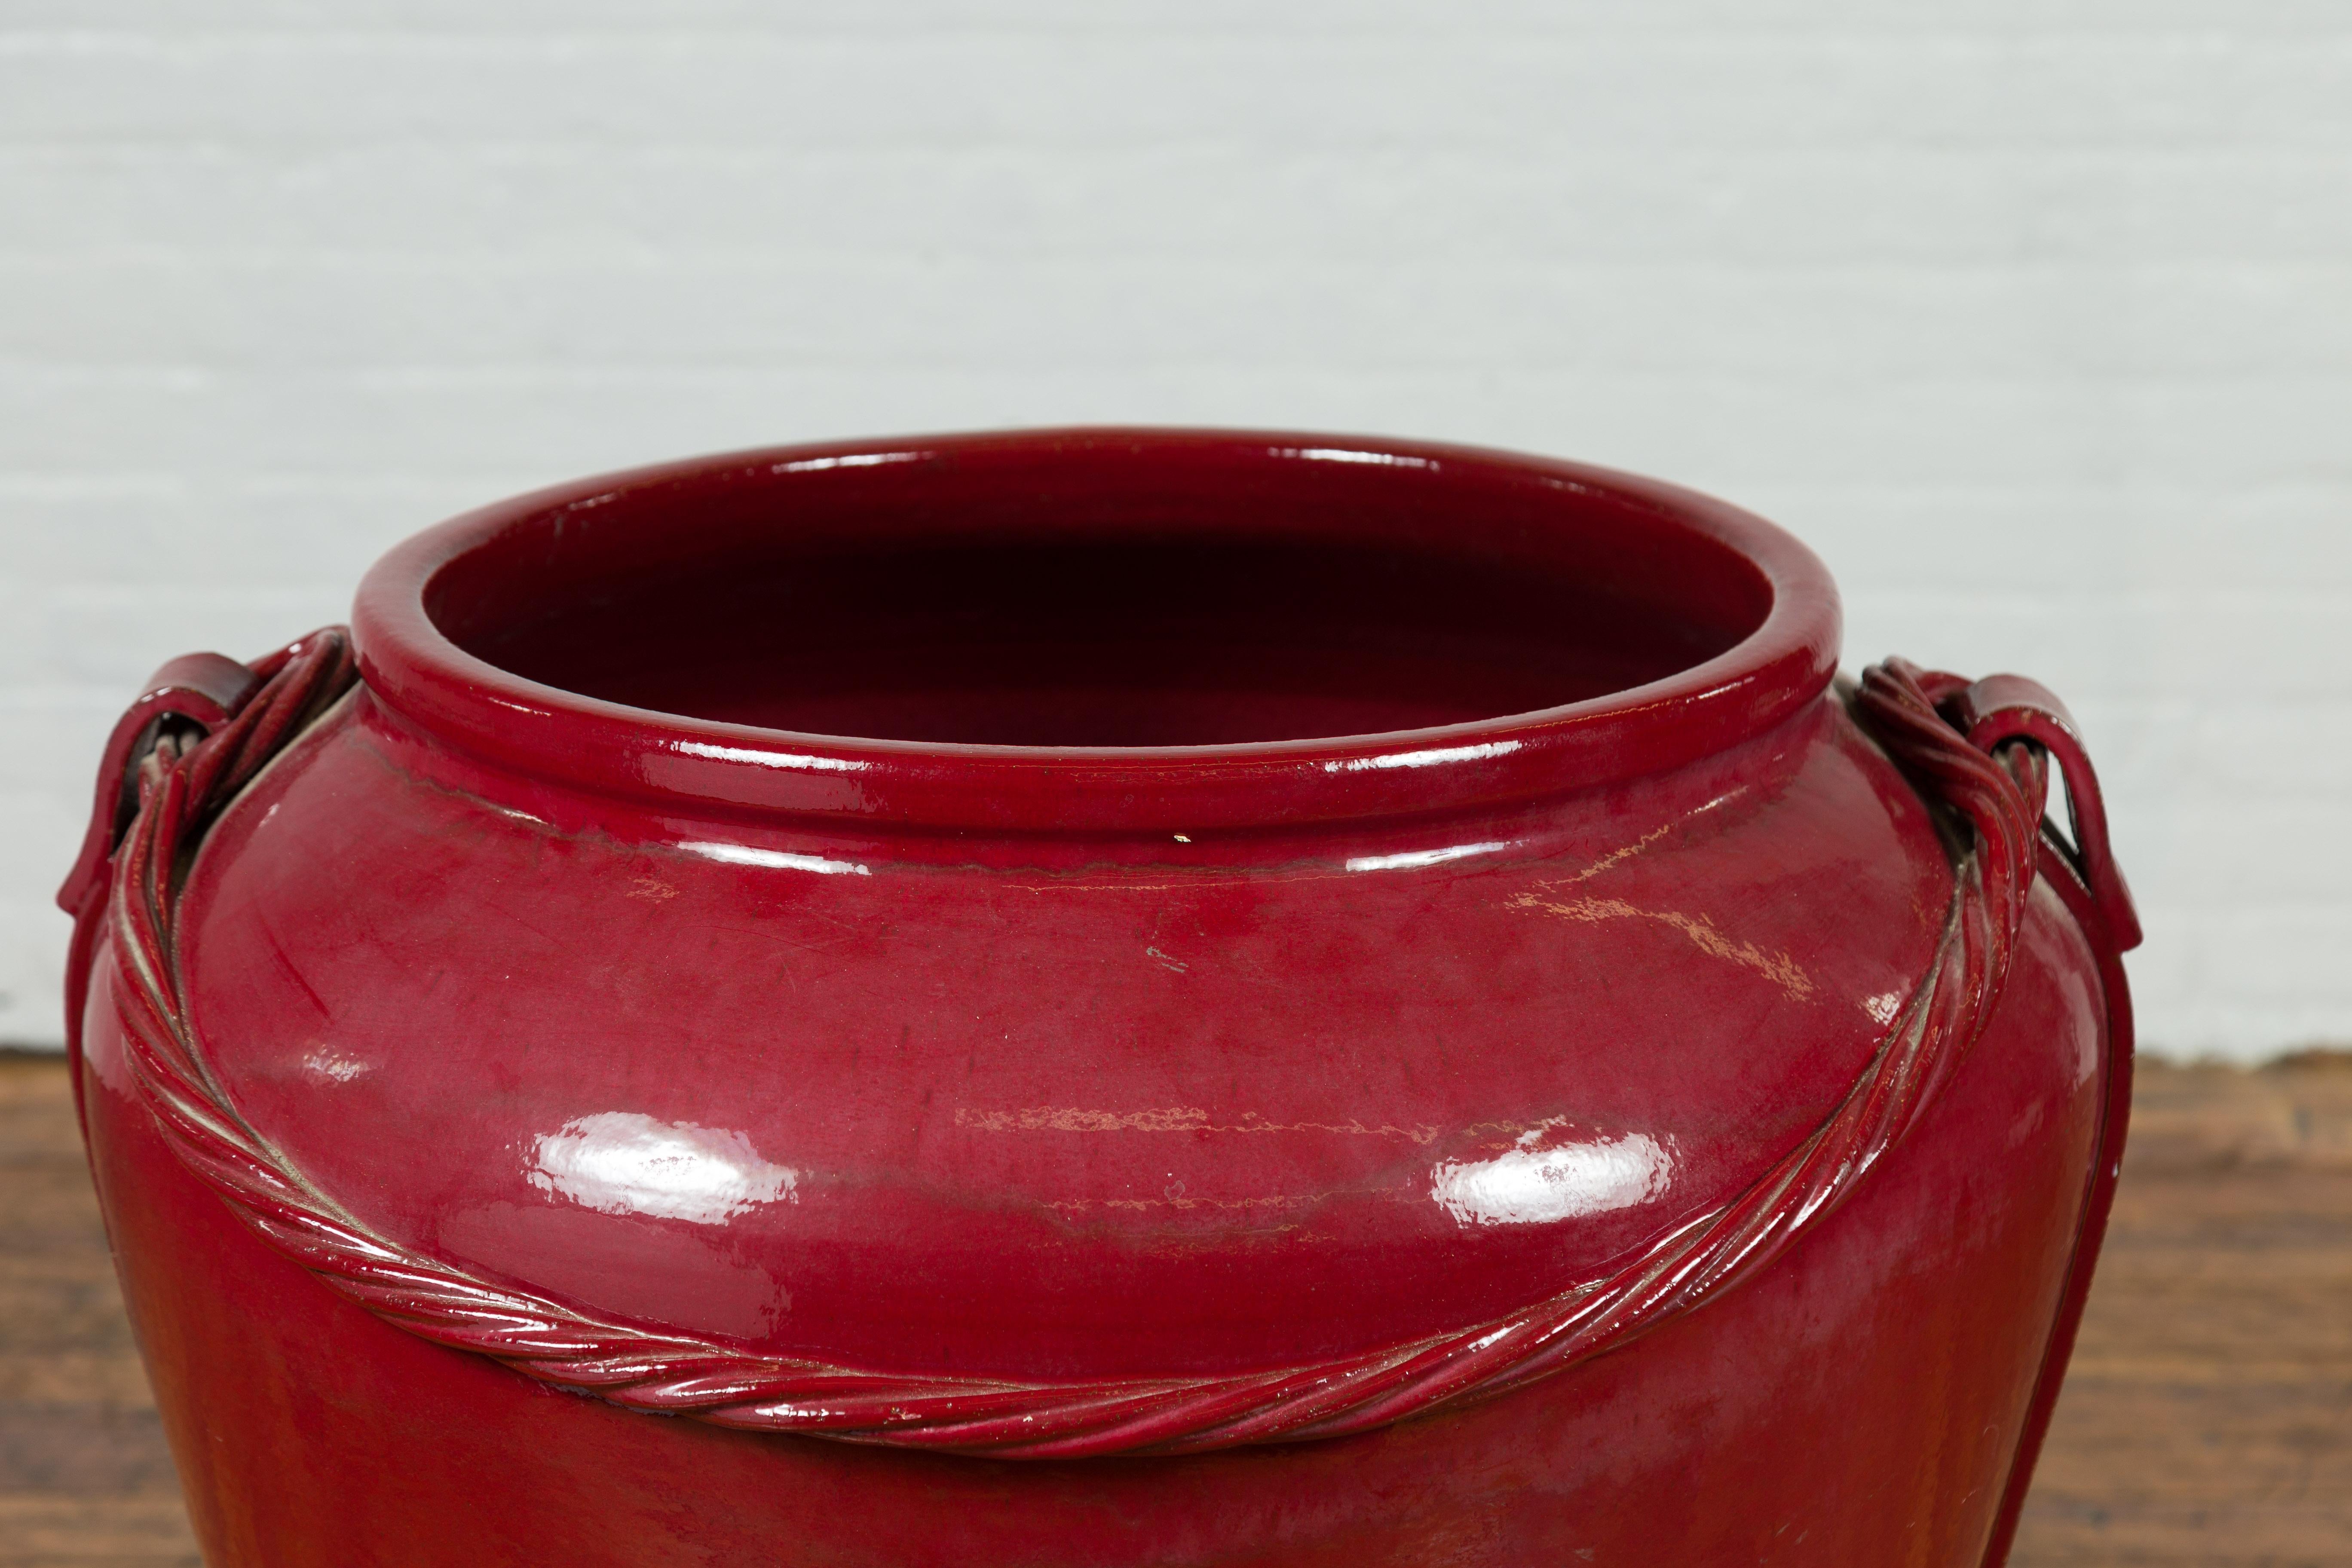 Contemporary Thai Oversized Oxblood Water Jar from Chiang Mai with Rope Design In Good Condition For Sale In Yonkers, NY